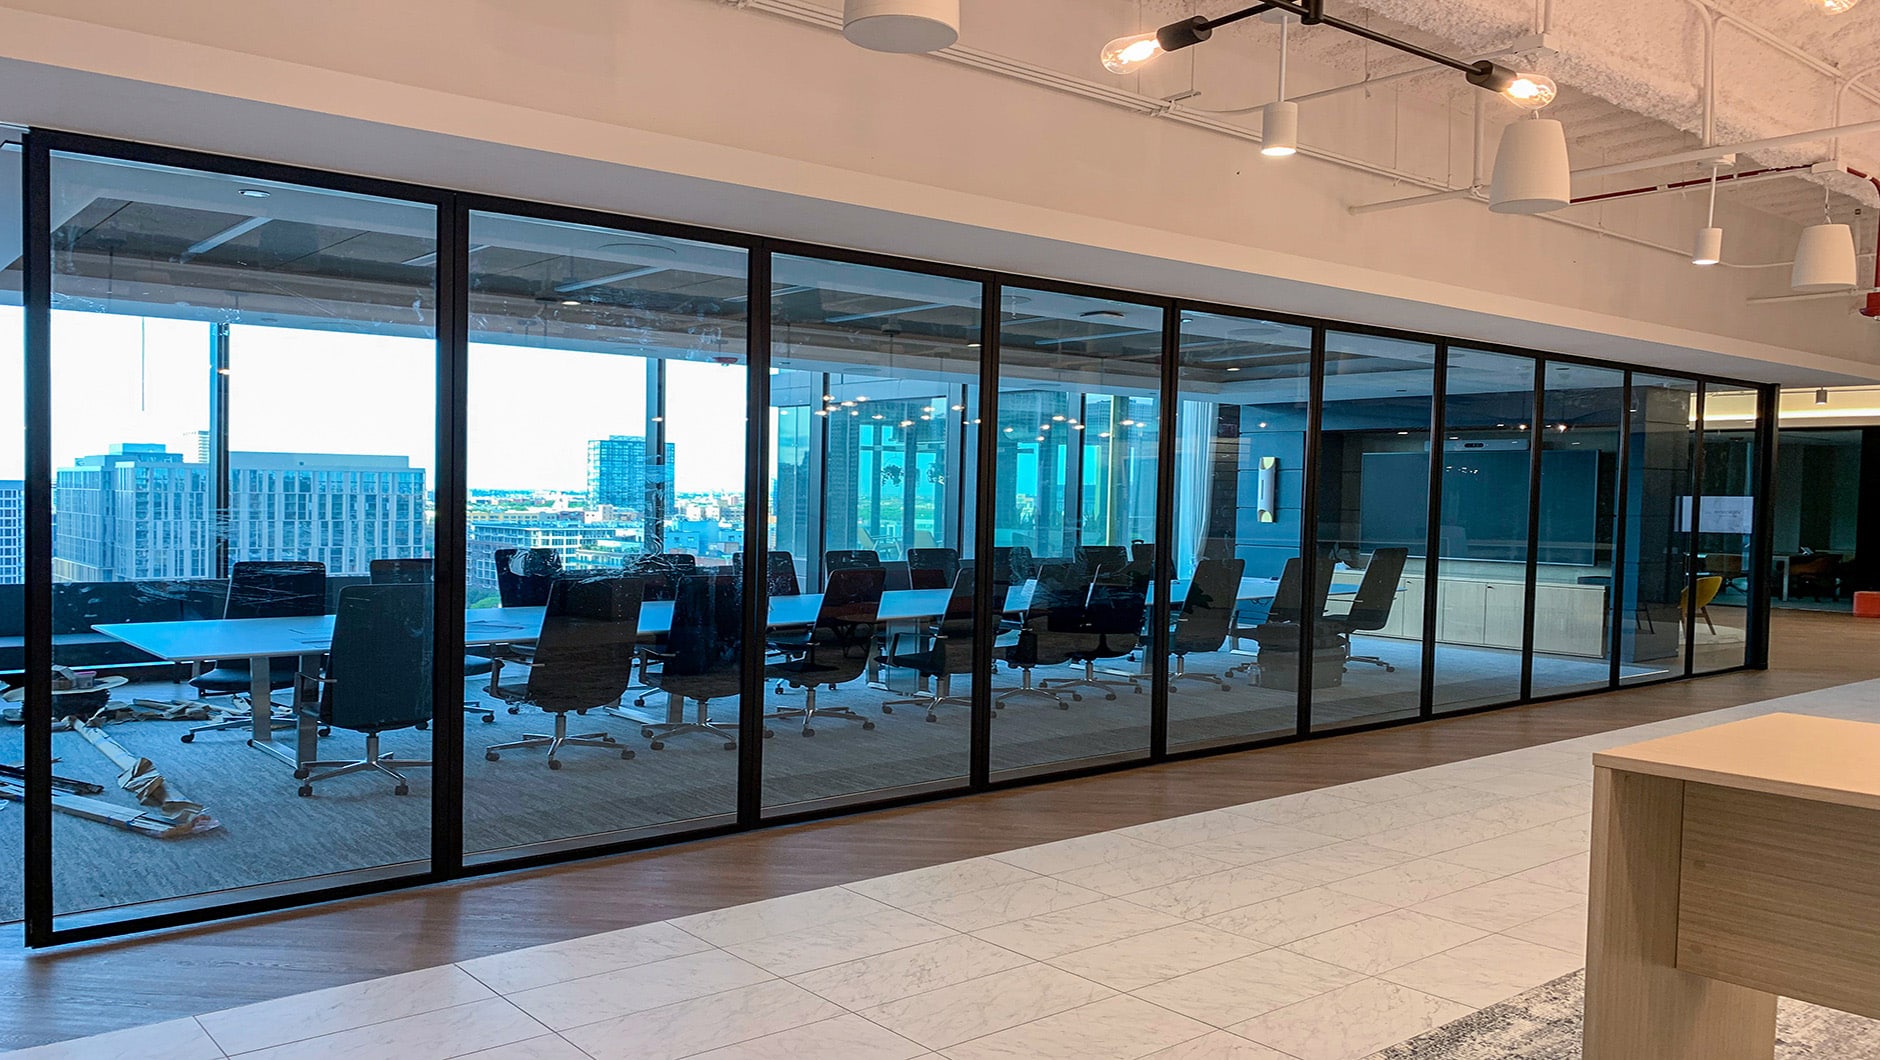 Office conference room with glass walls.